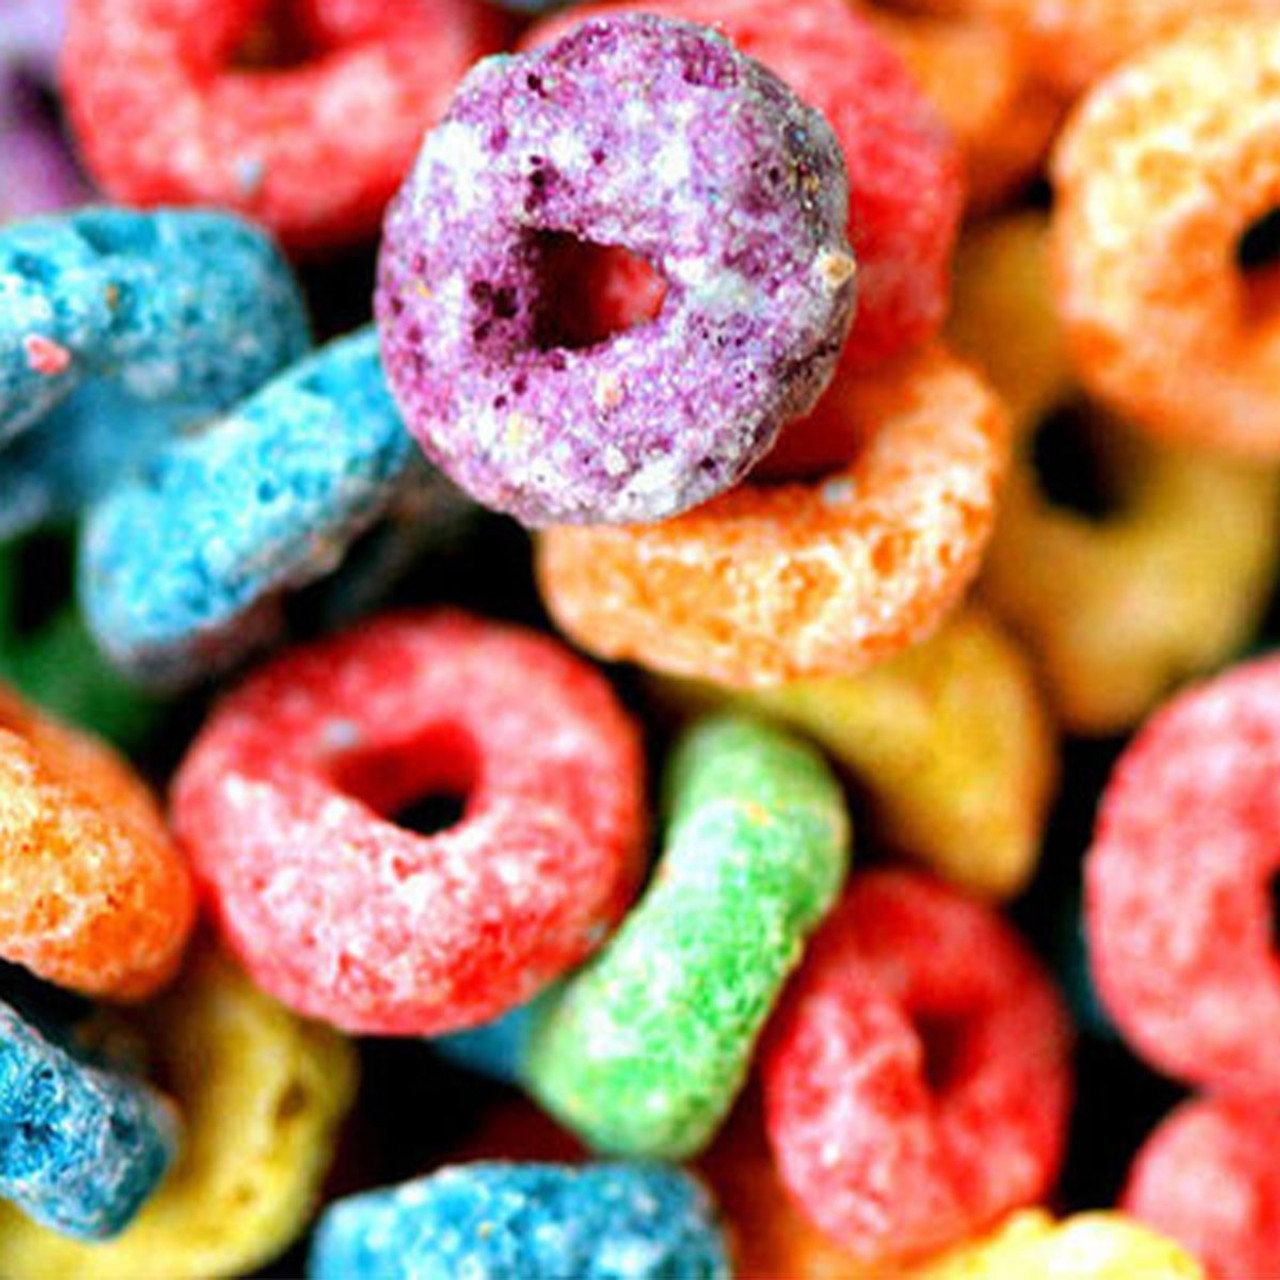 Scent for Senses' Fruit Loops Blend is inspired by the famous fun